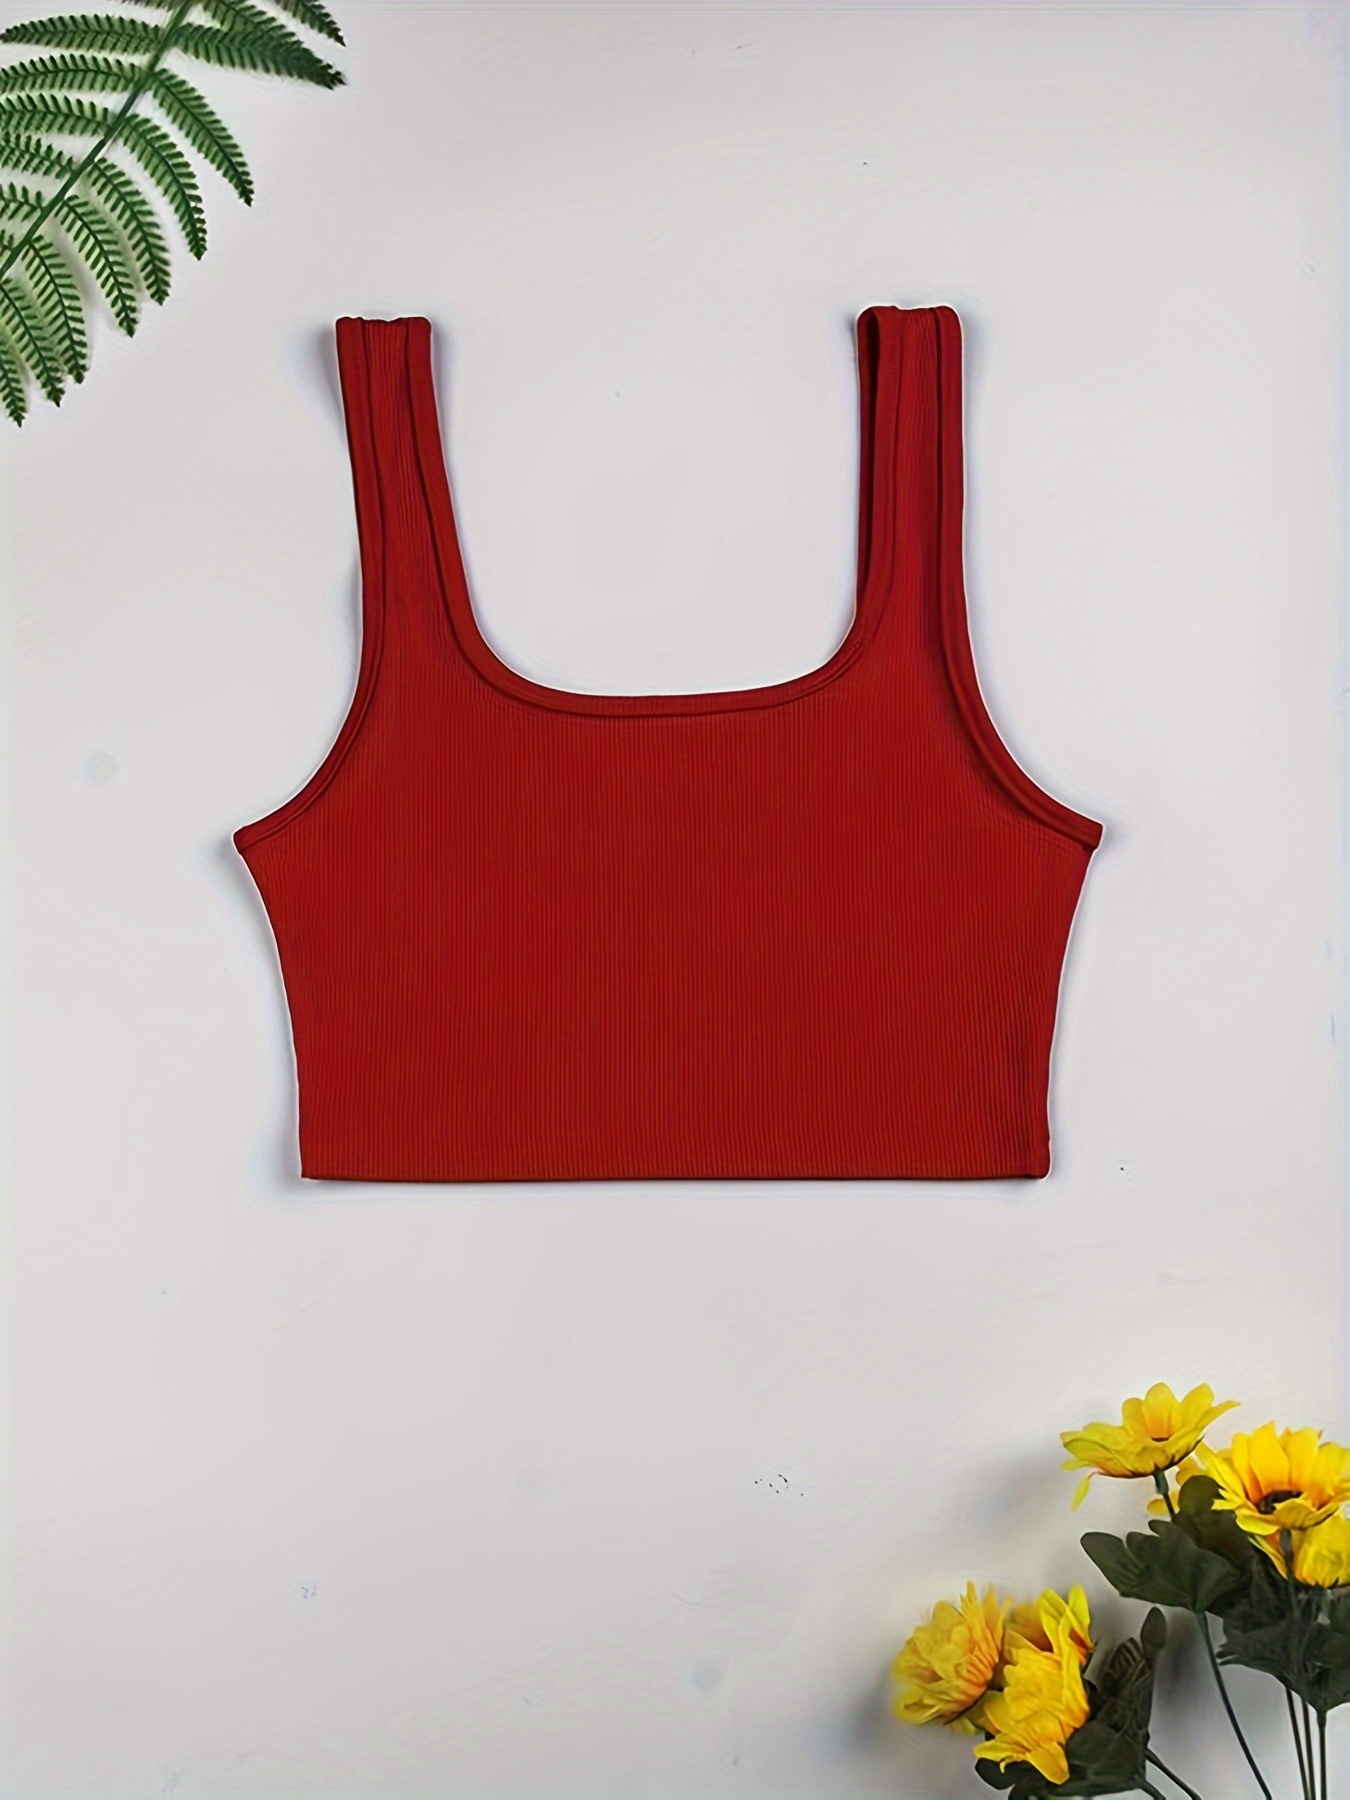 Red Spaghetti Crop Top, Cropped Tank Top, Crop Tops for Women